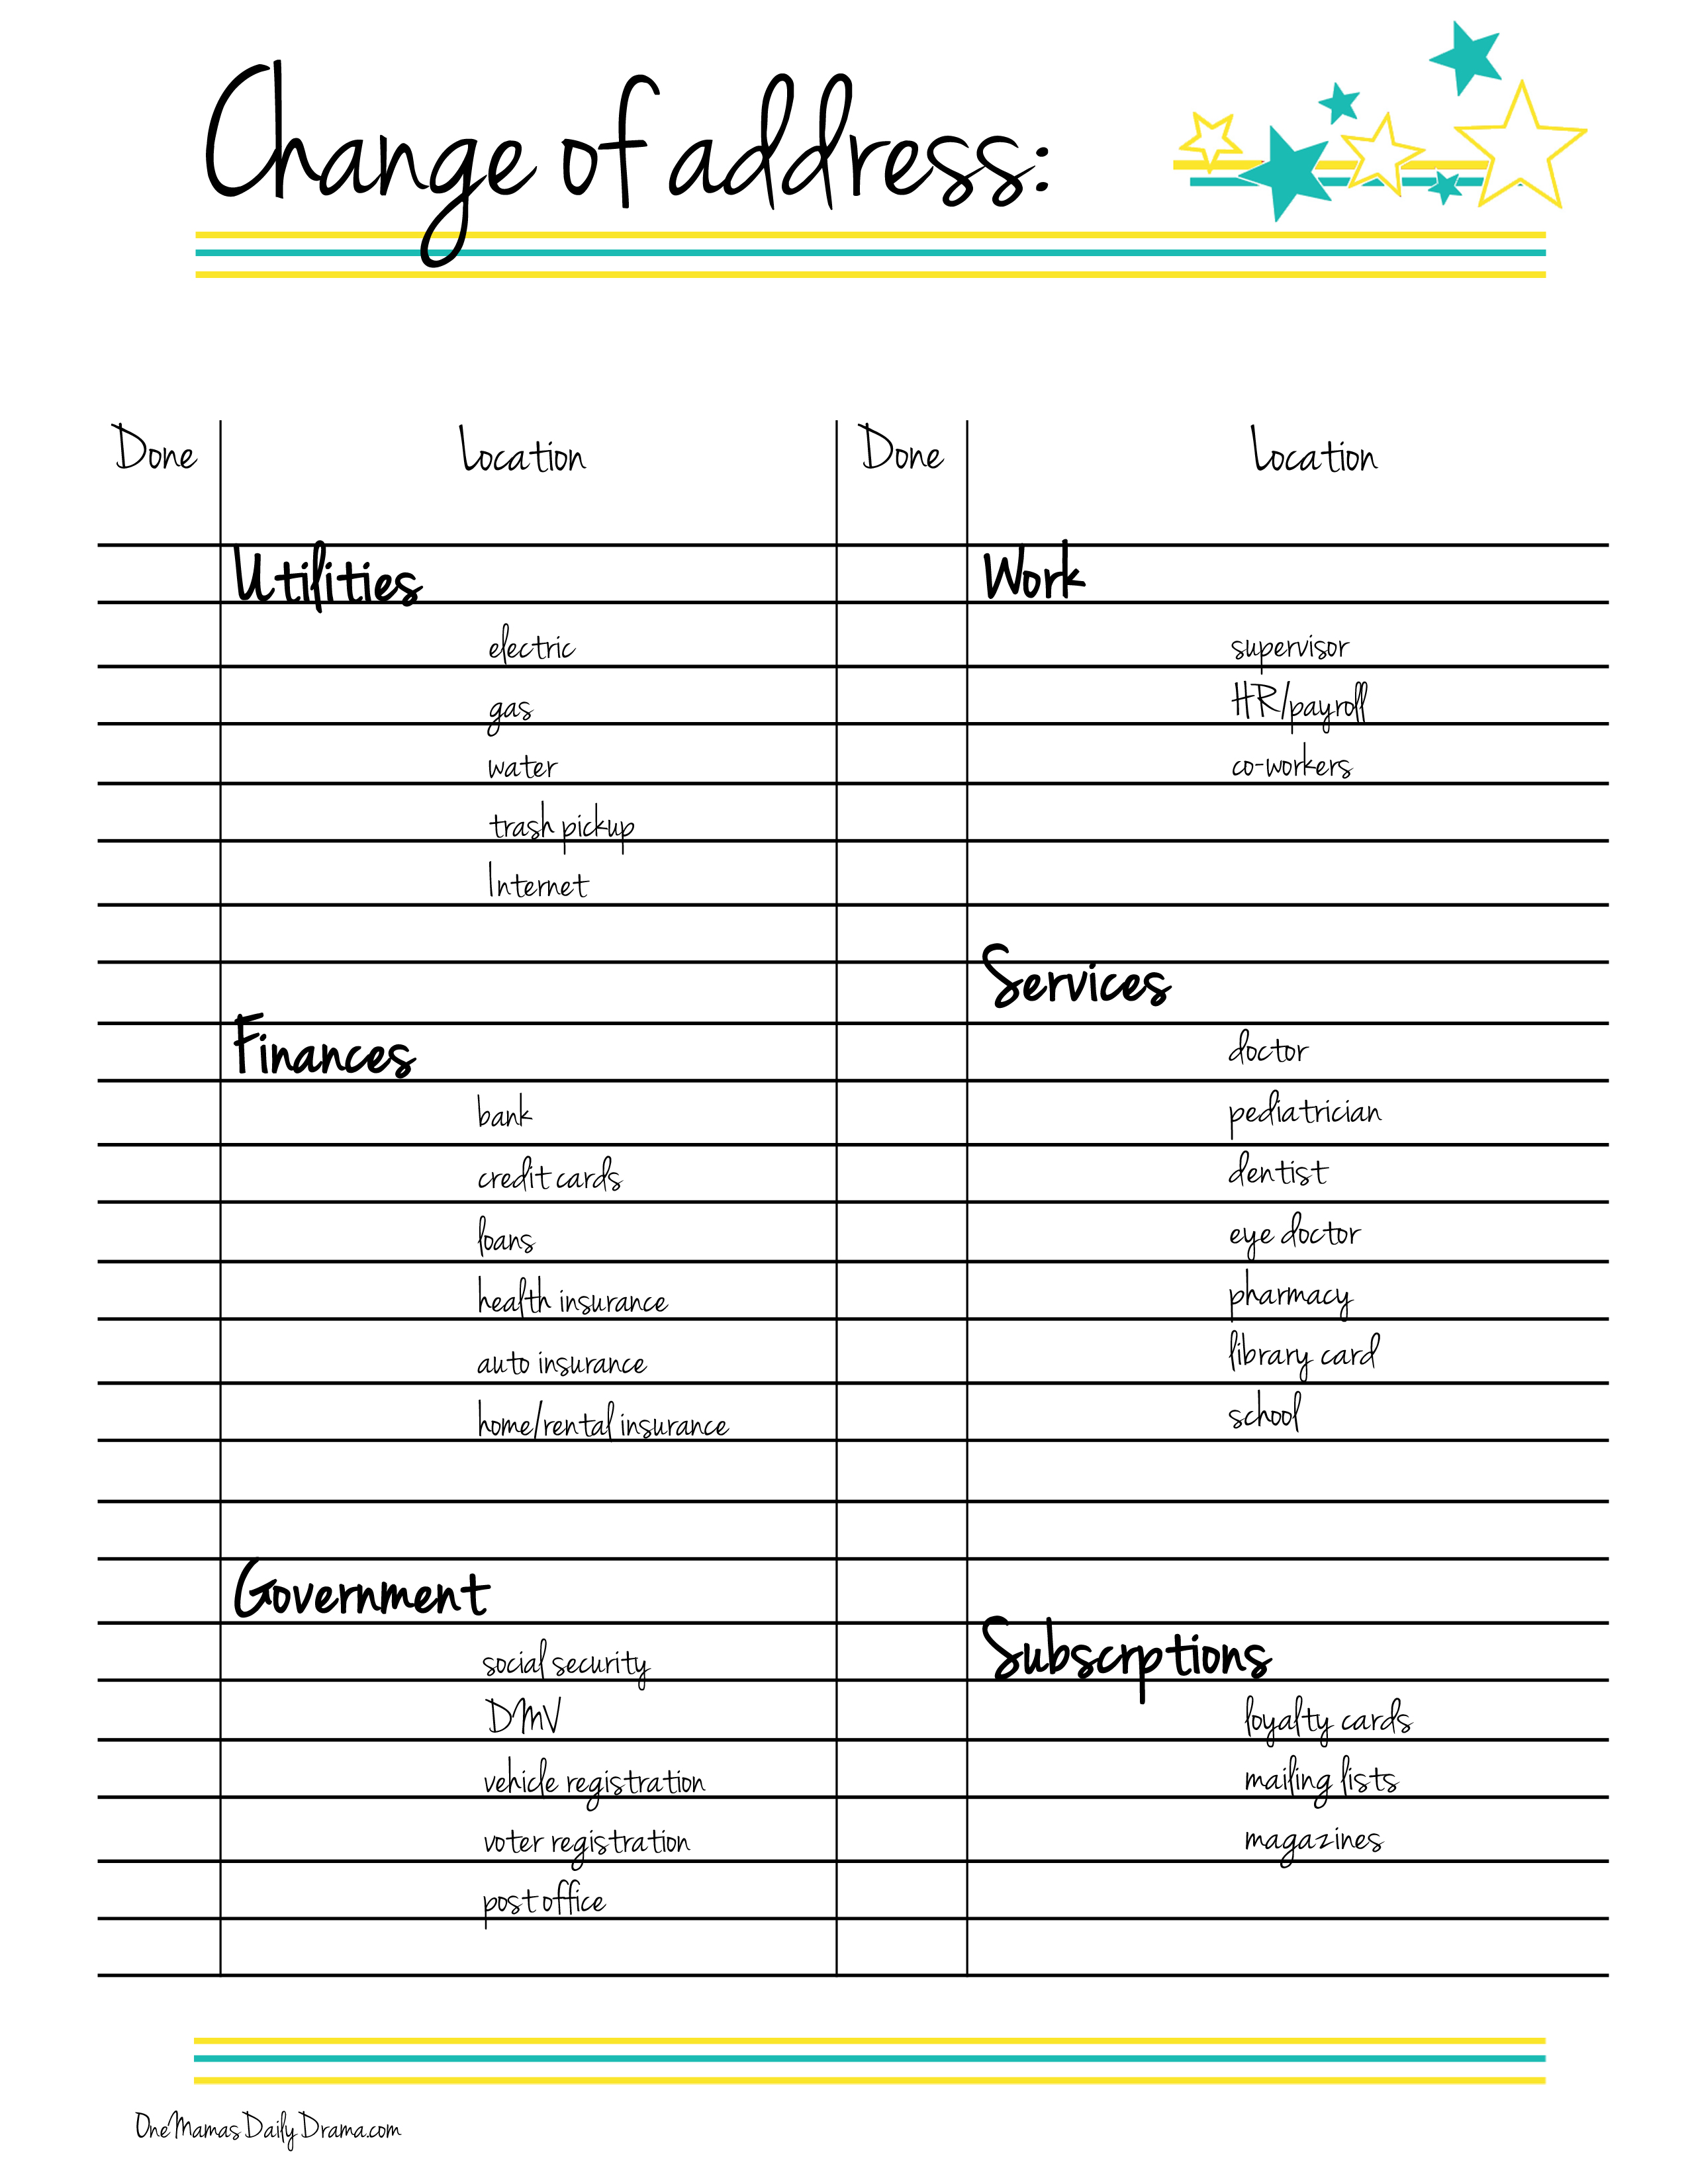 printable-address-change-checklist-template-business-psd-excel-word